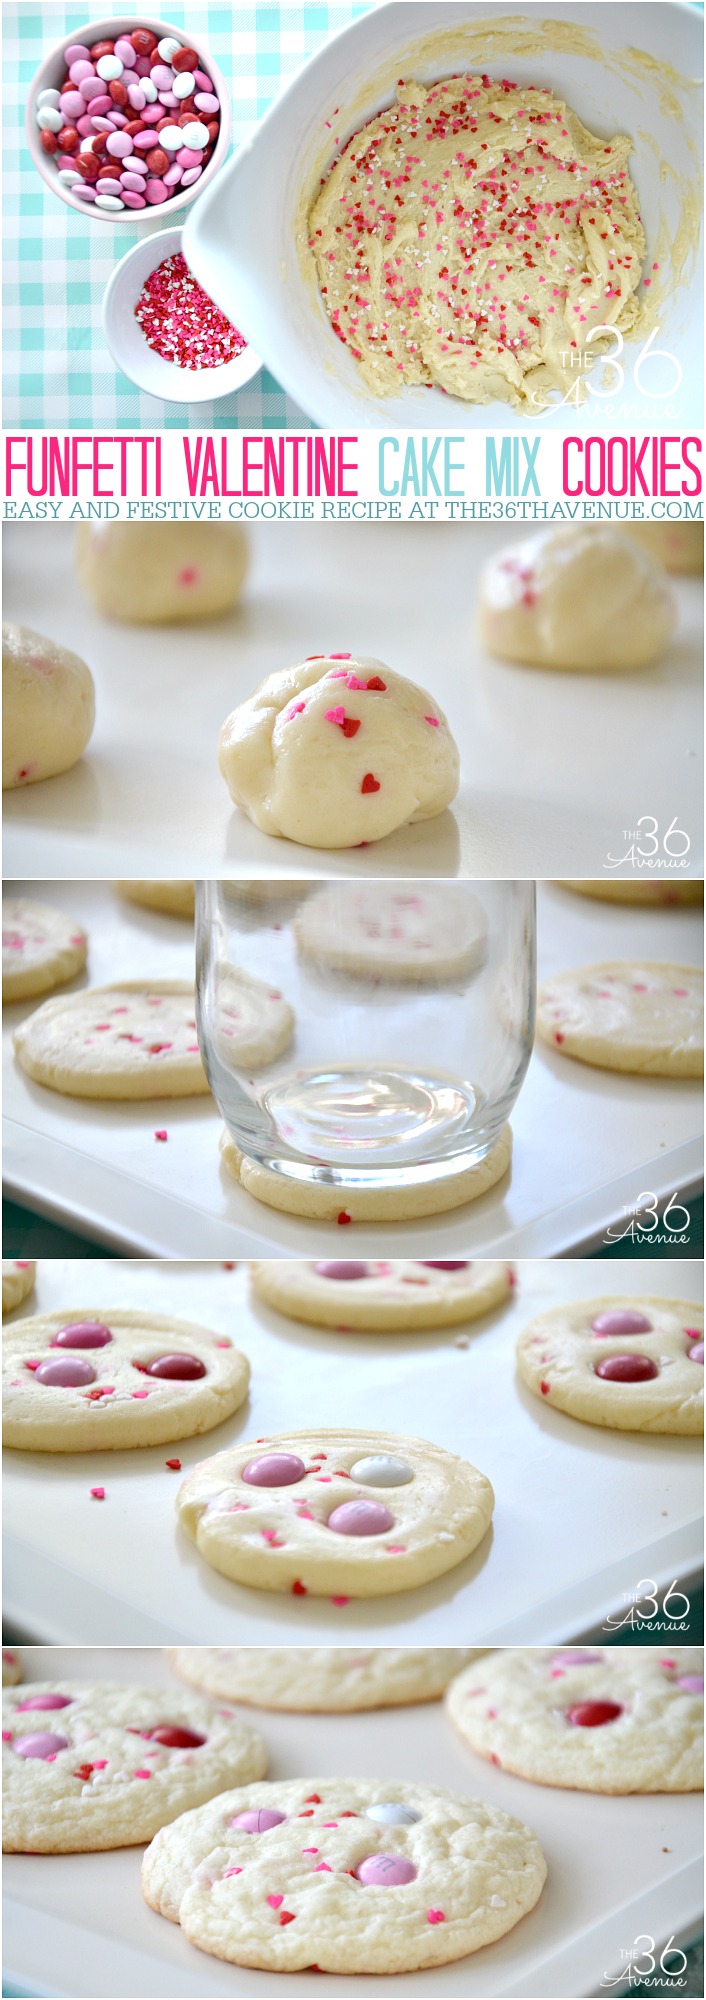 Valentine Cookie Recipe - Homemade cookies are the best! This easy Valentine Cake Mix Cookie Recipe is super easy to make and you'll need just a few ingredients. These Funfetti Valentine Cookies are festive, yummy, and perfect for gifts or any time you are craving a snack! PIN IT NOW and make them later!